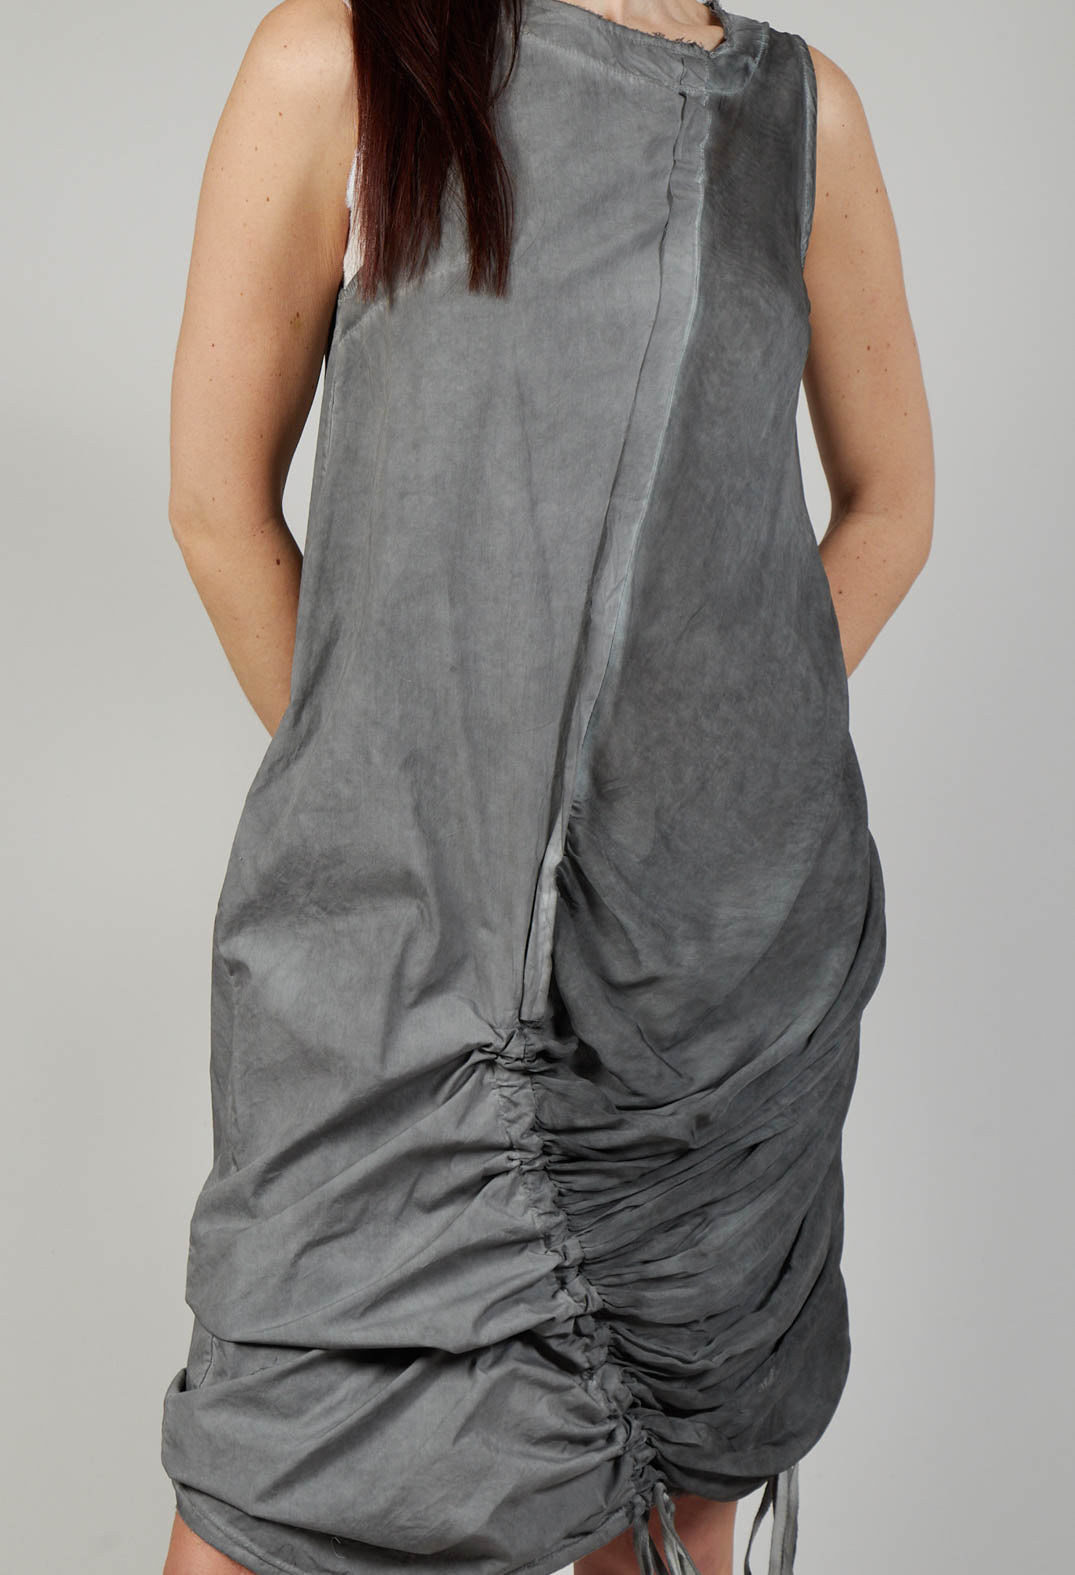 Ruched Dress in Tela Paracadute Tinto Freddo Grey Storm